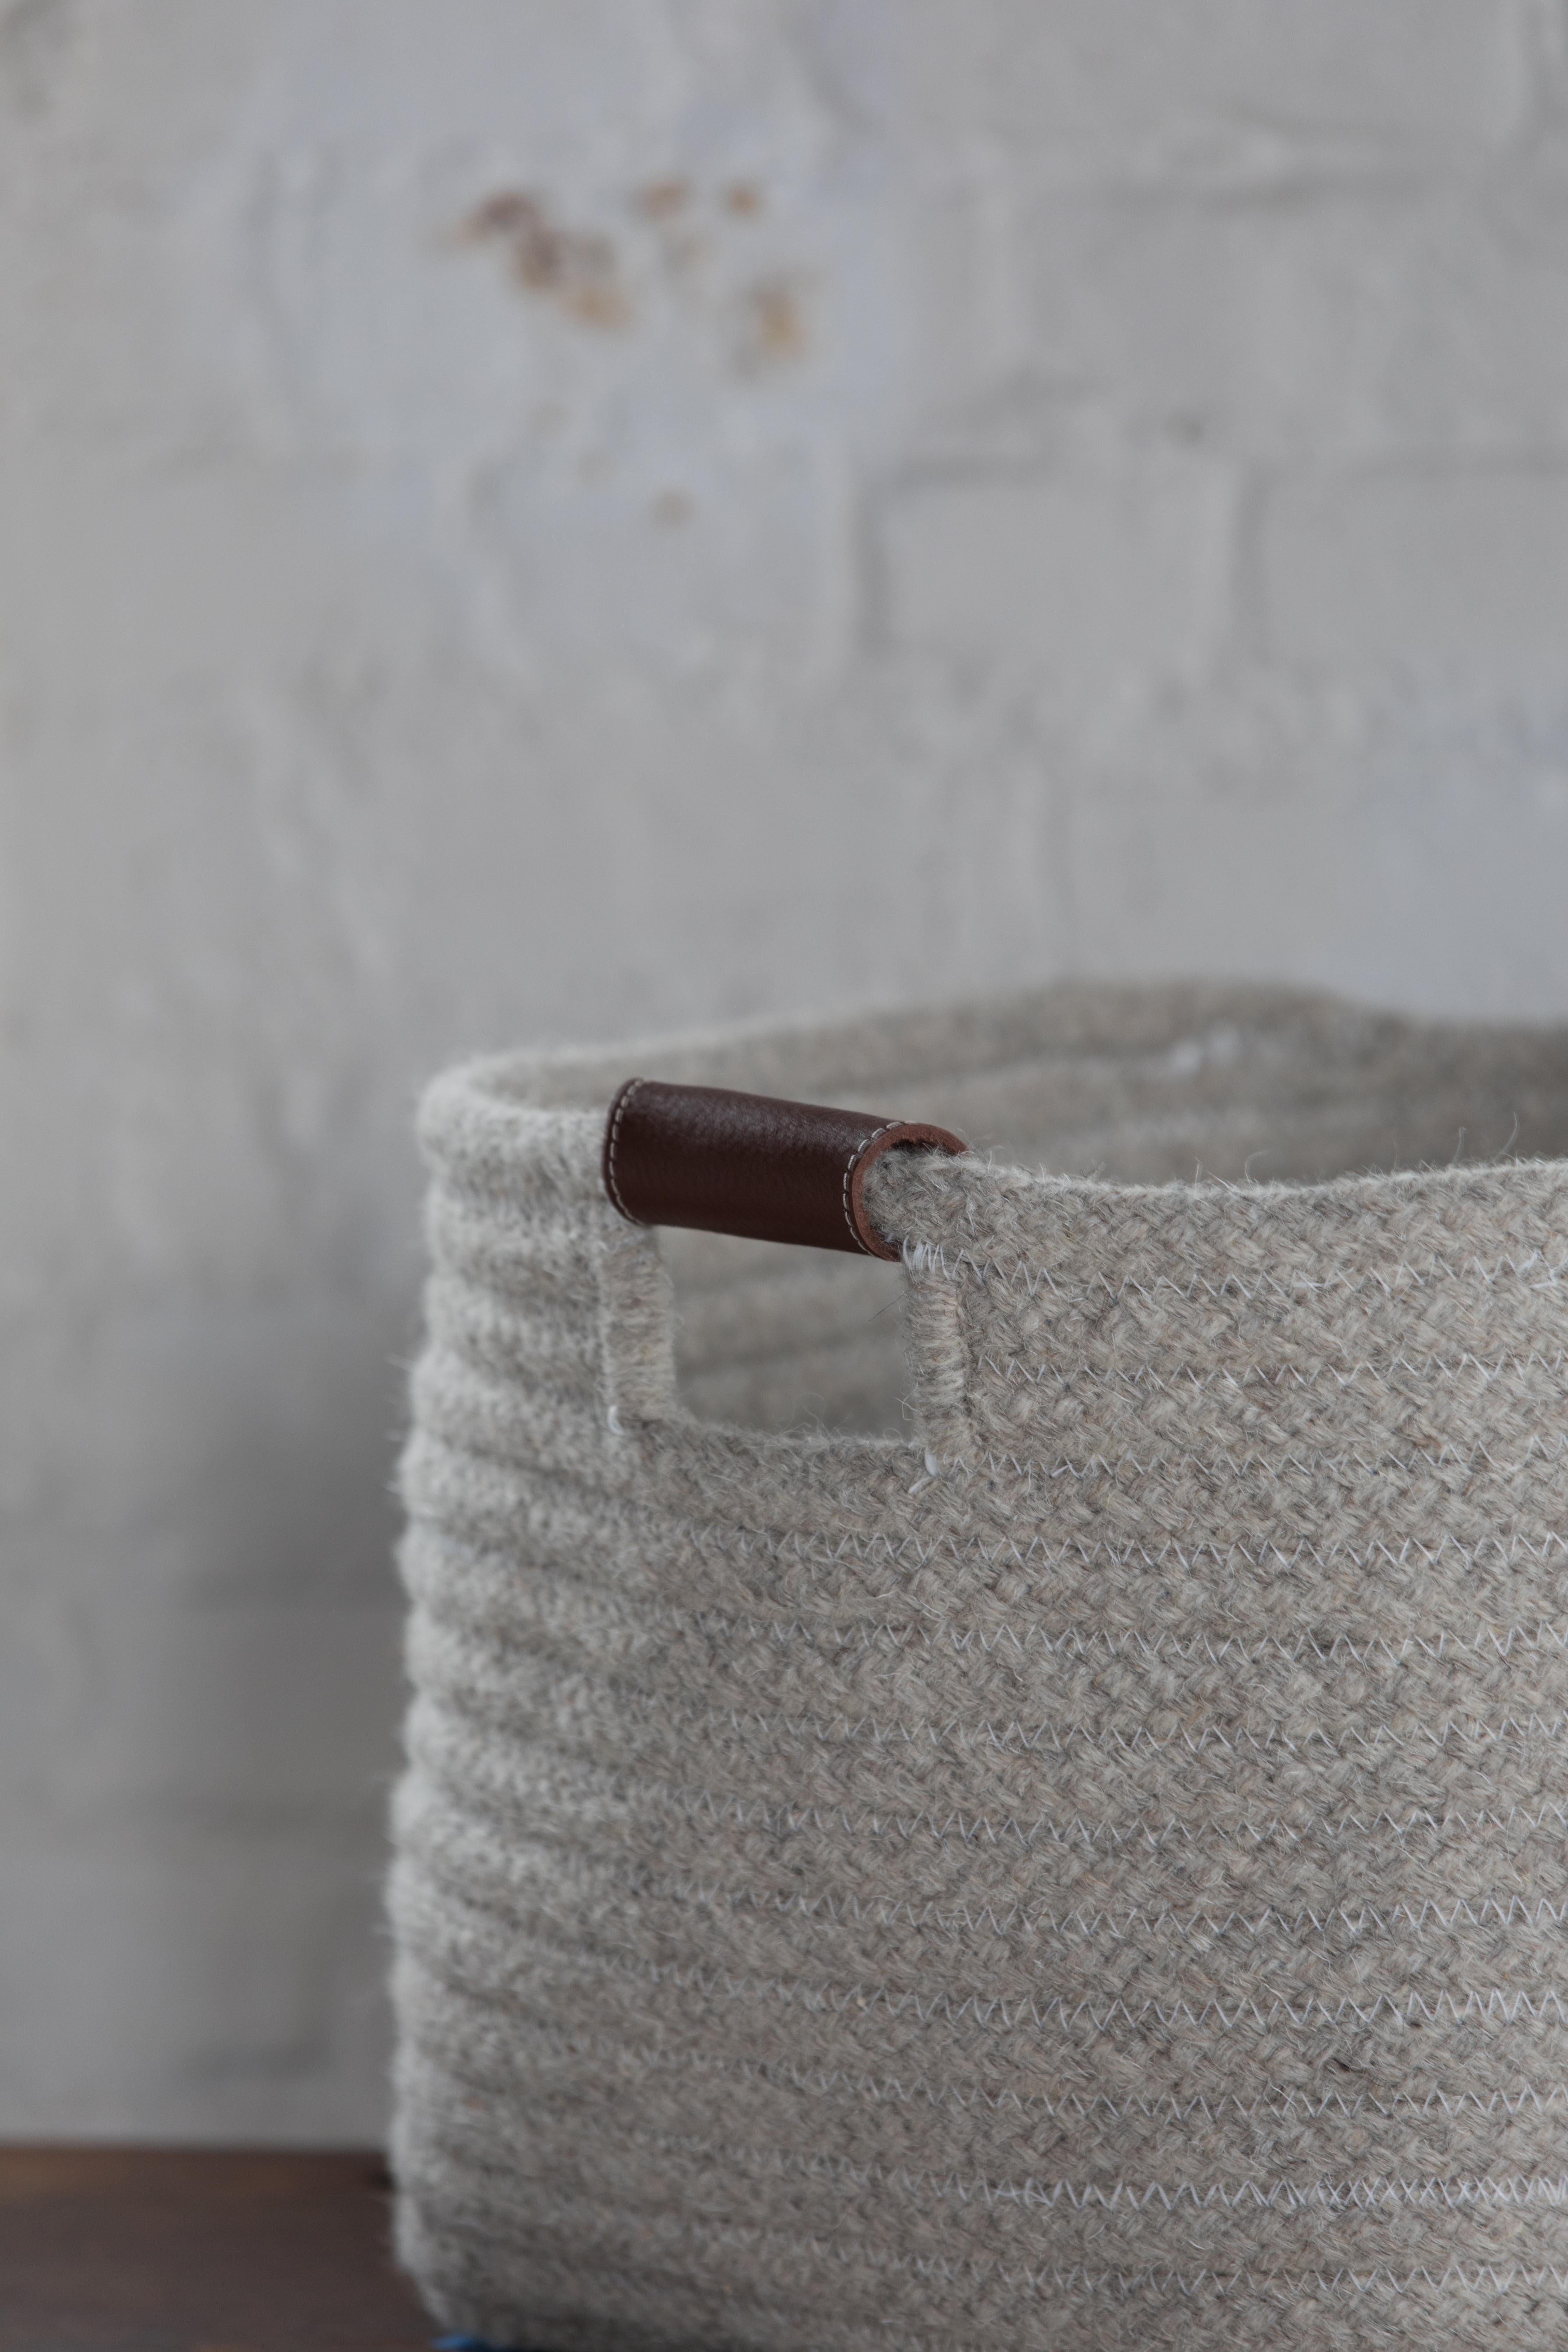 Simple and sturdy woven basket in a rectangle design. Light grey, natural un-dyed wool is accented with leather handles. Handle color options are brown, black, and natural. 

Designed by Meredith Thayer in her South Boston studio and made to order